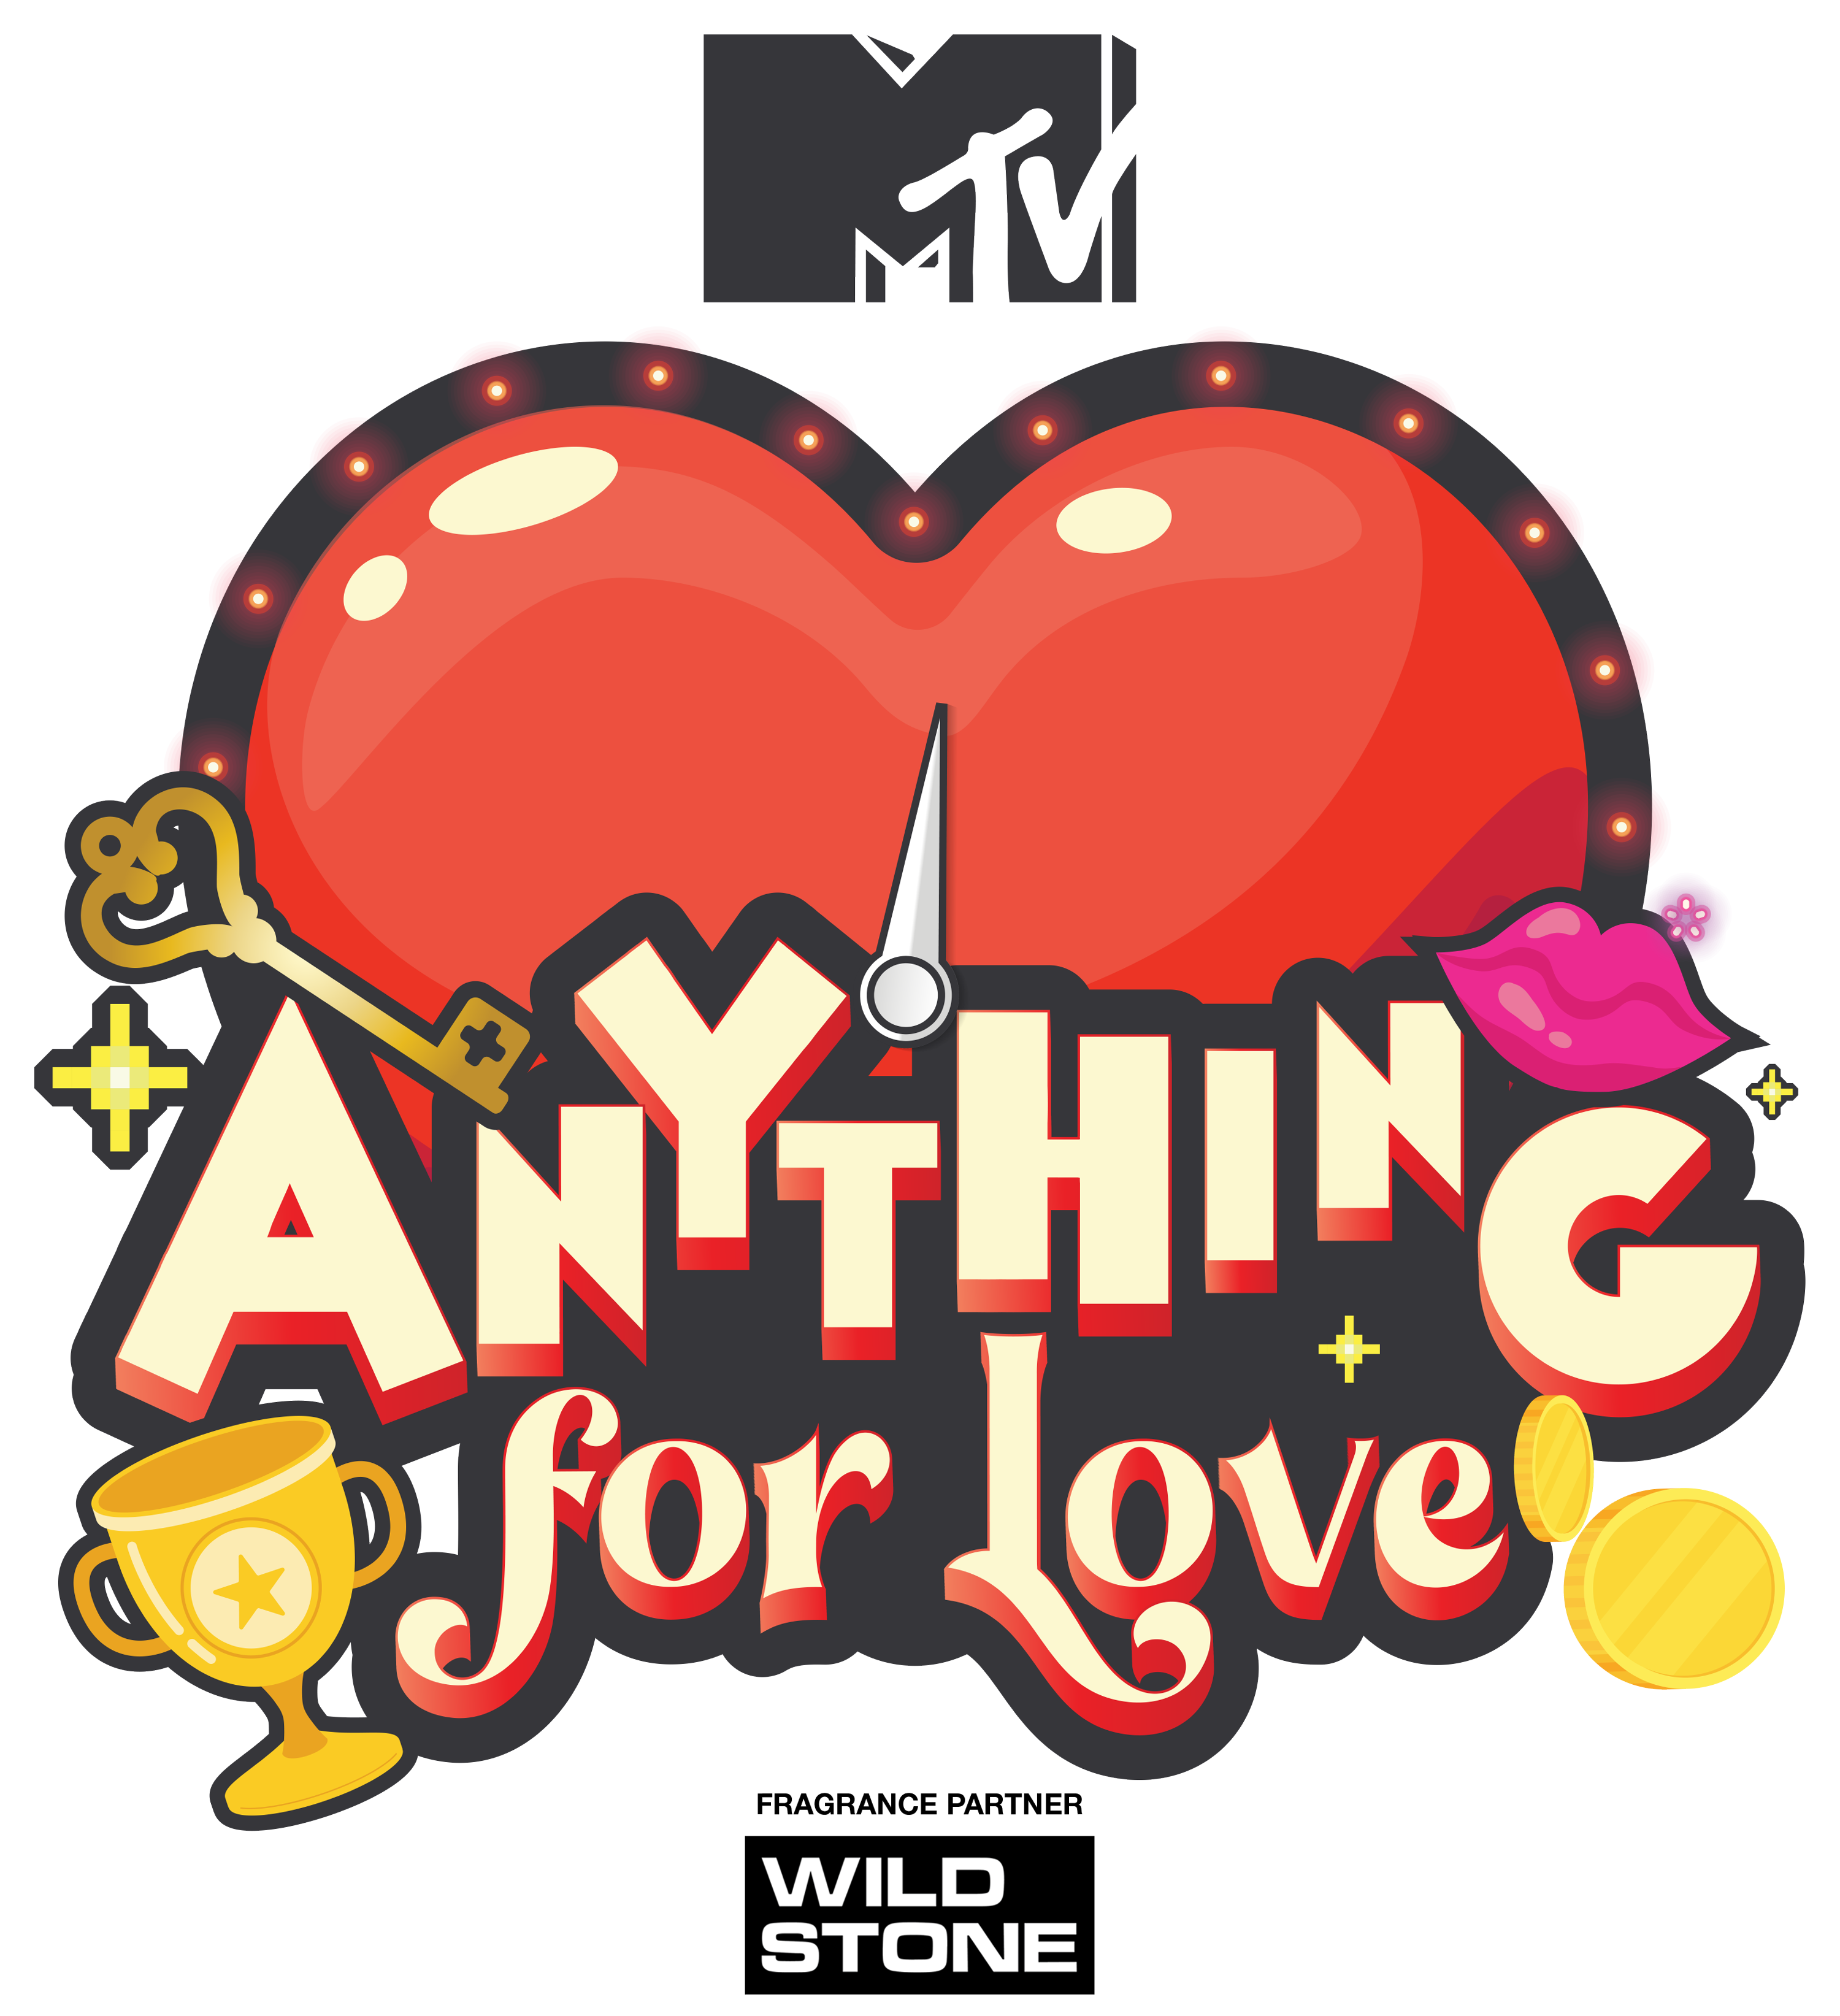 How far are you willing to go for Love – asks MTV through their new show - ‘MTV Anything For Love’